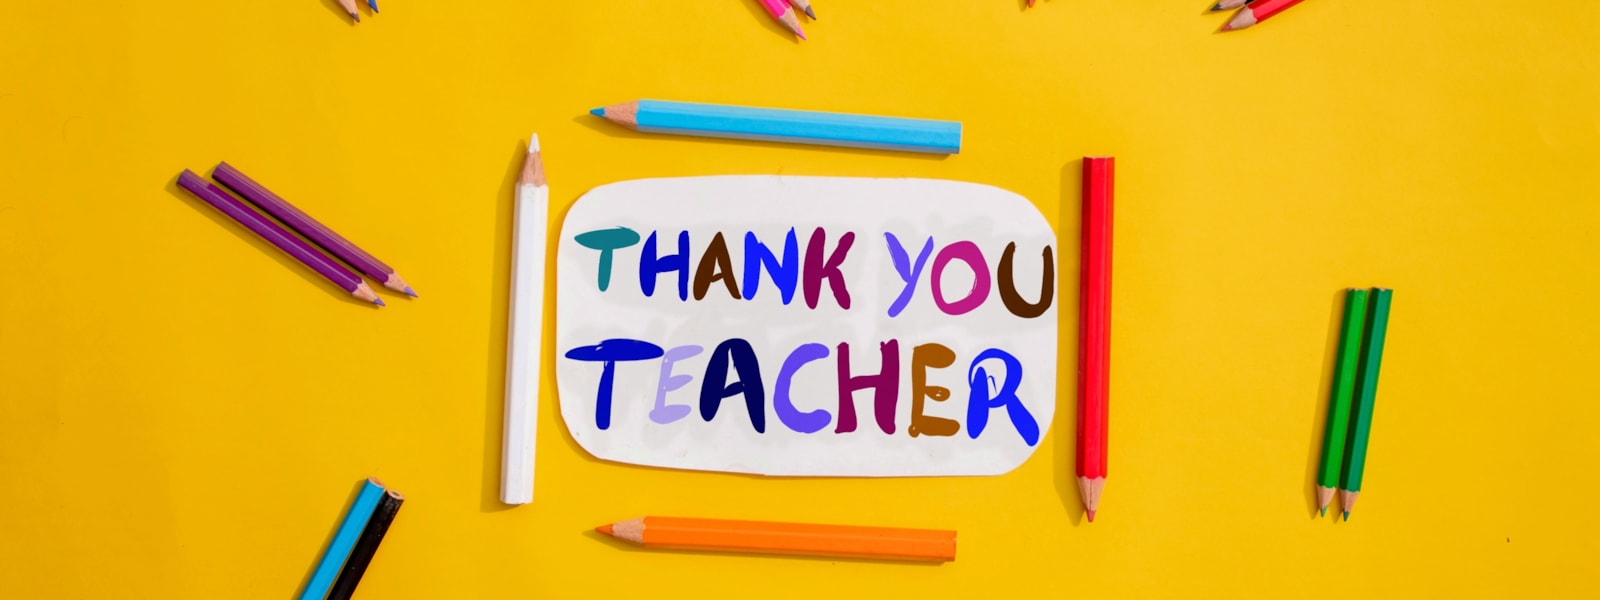 Thank you Teacher sign with colored pencils